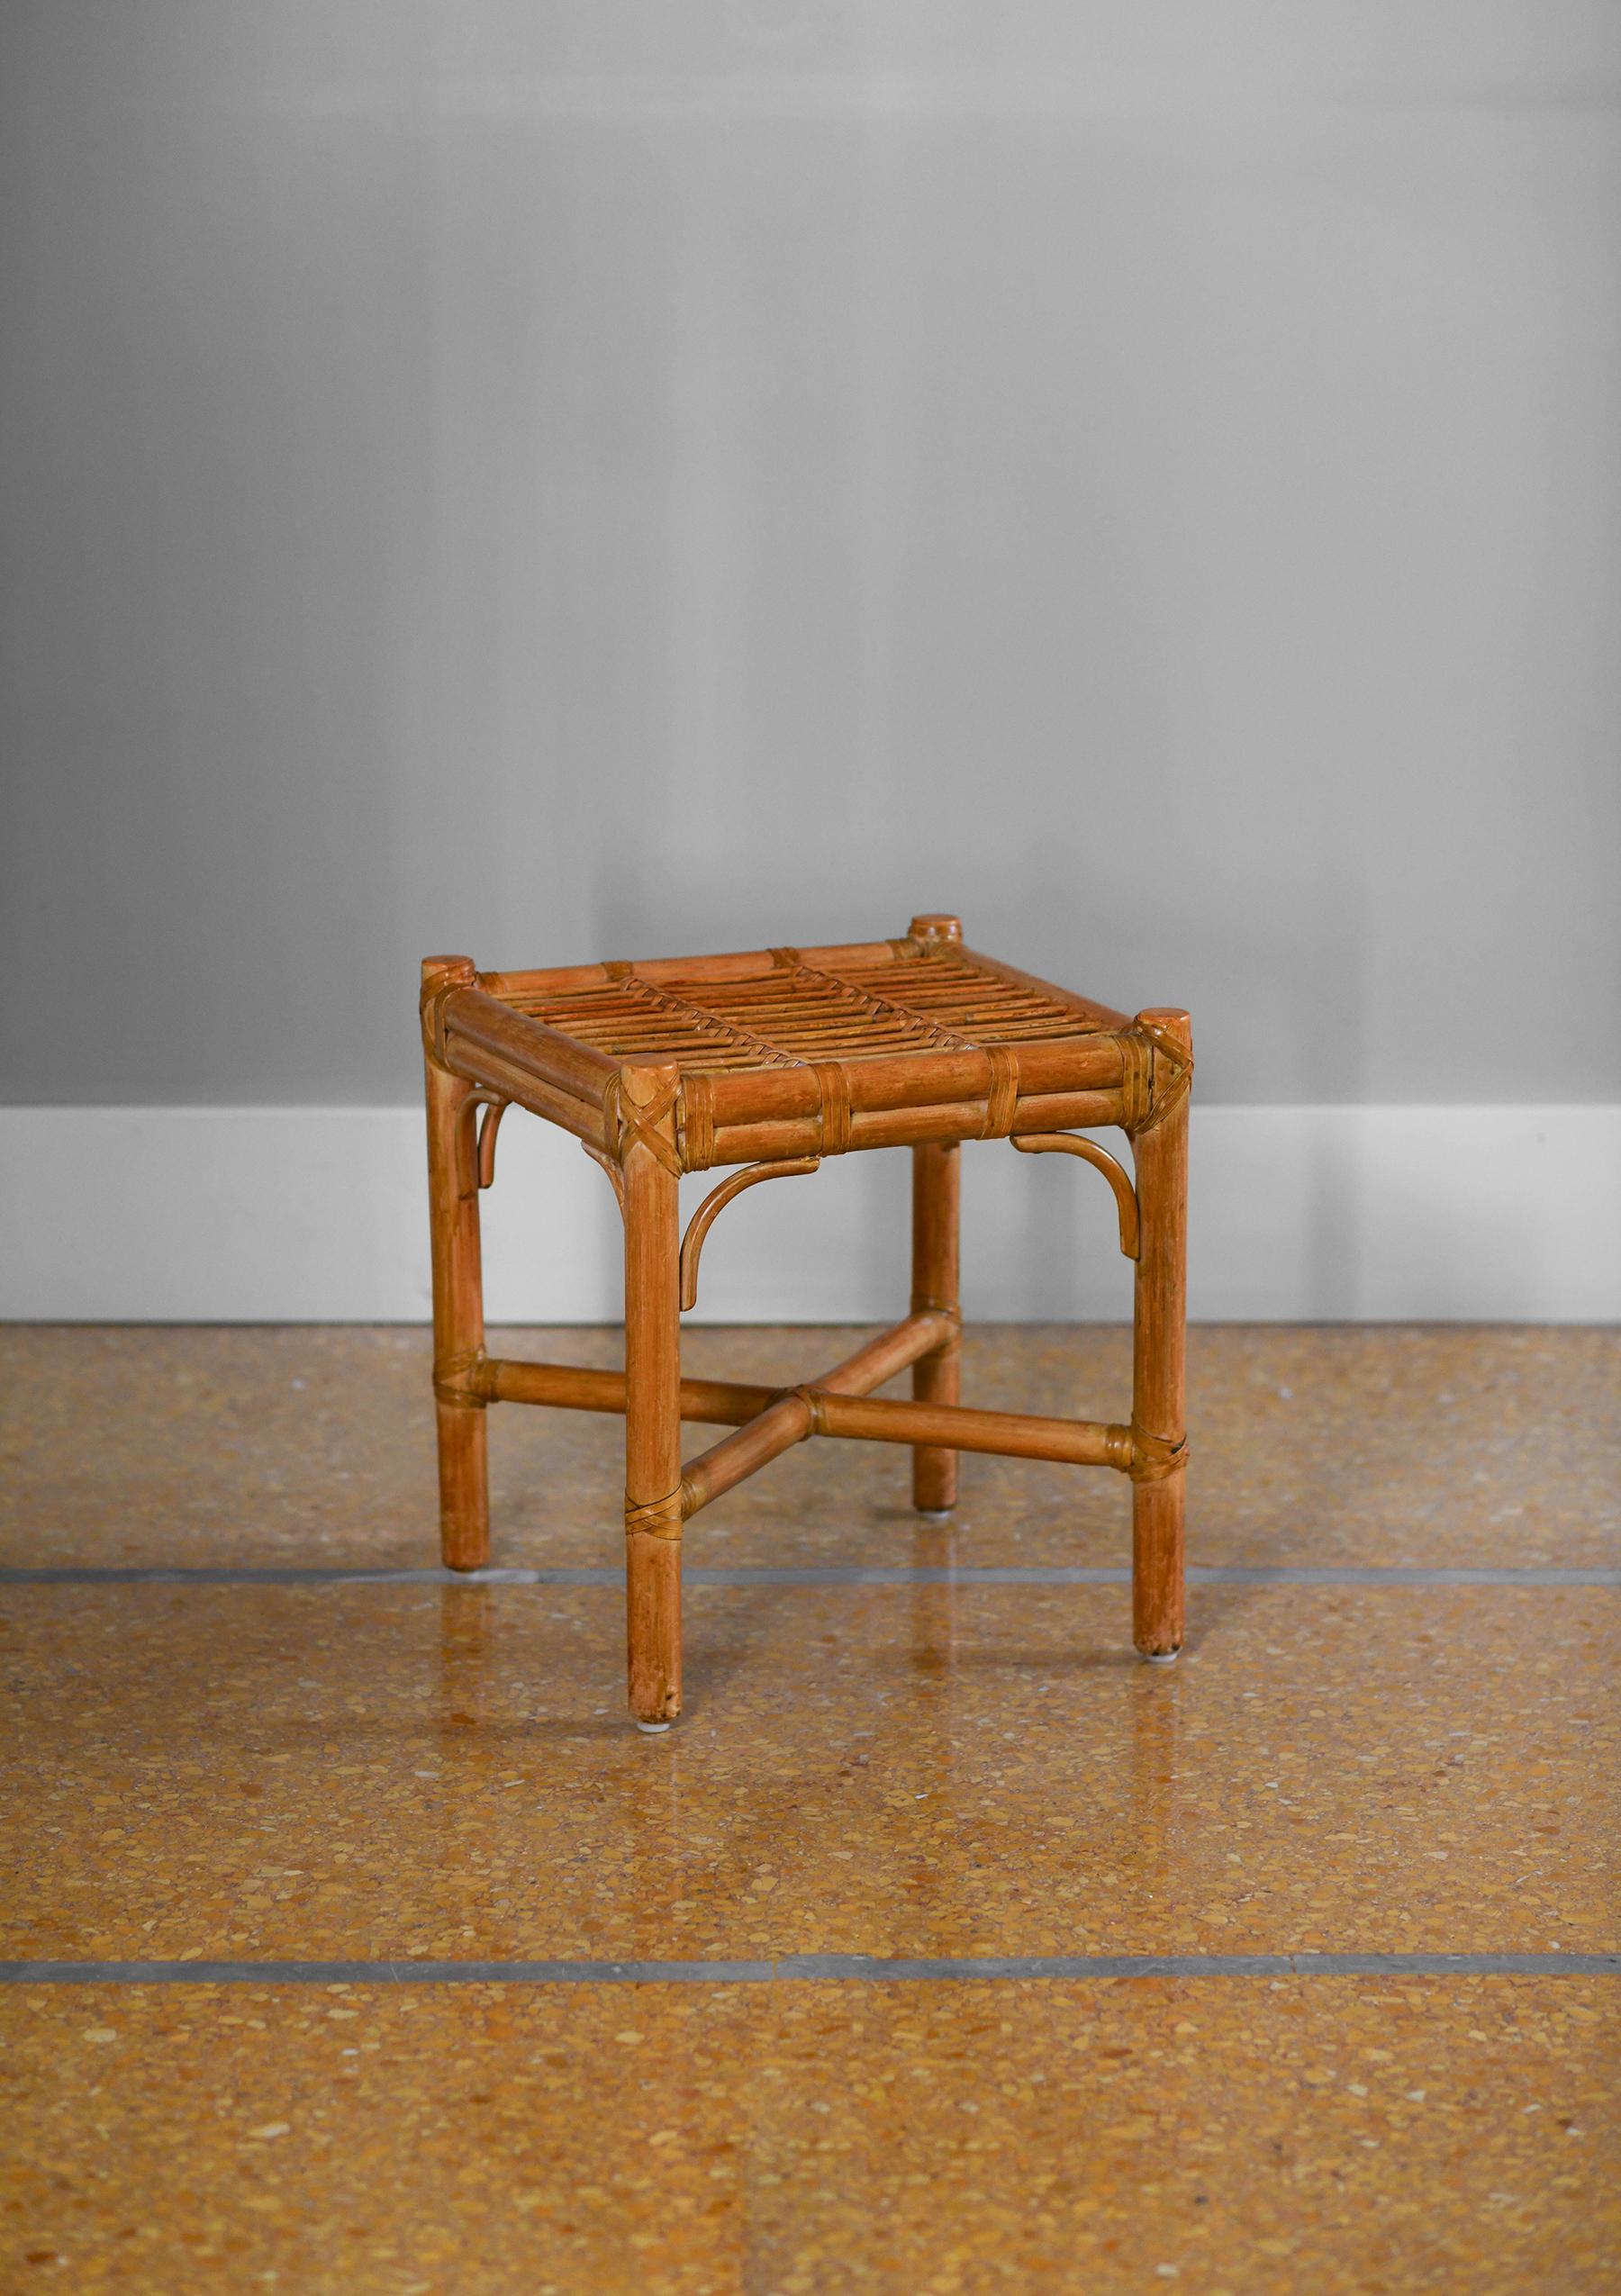 Side Table in rush and wicker 1980
Dimensions: 42 W x 45 H x 42 D
Italy, 1980s